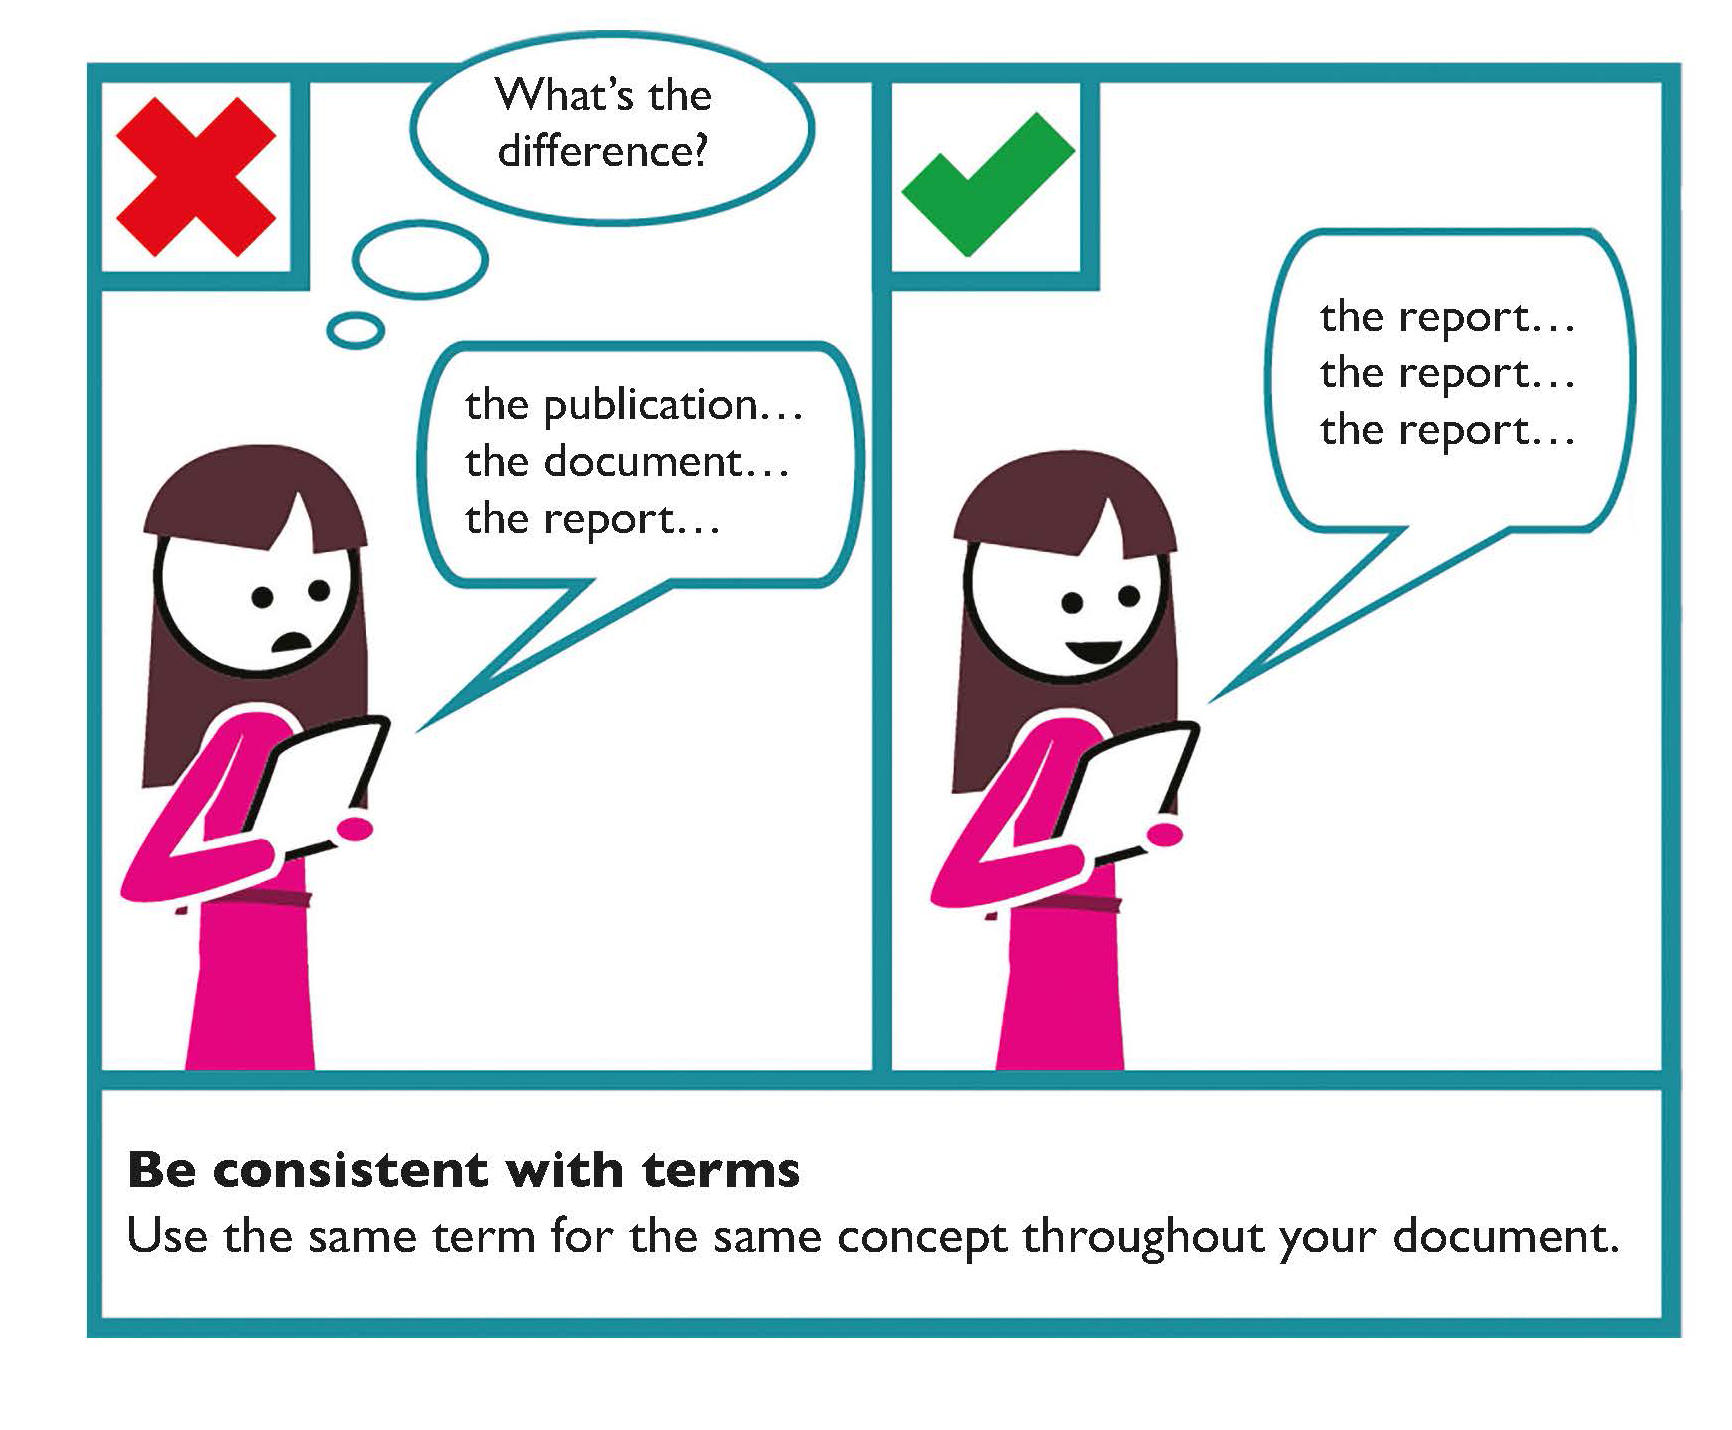 Be consistent with using the same term throughout a document, for example, instead of using the publication, the document, the report – always use the same term, the report.